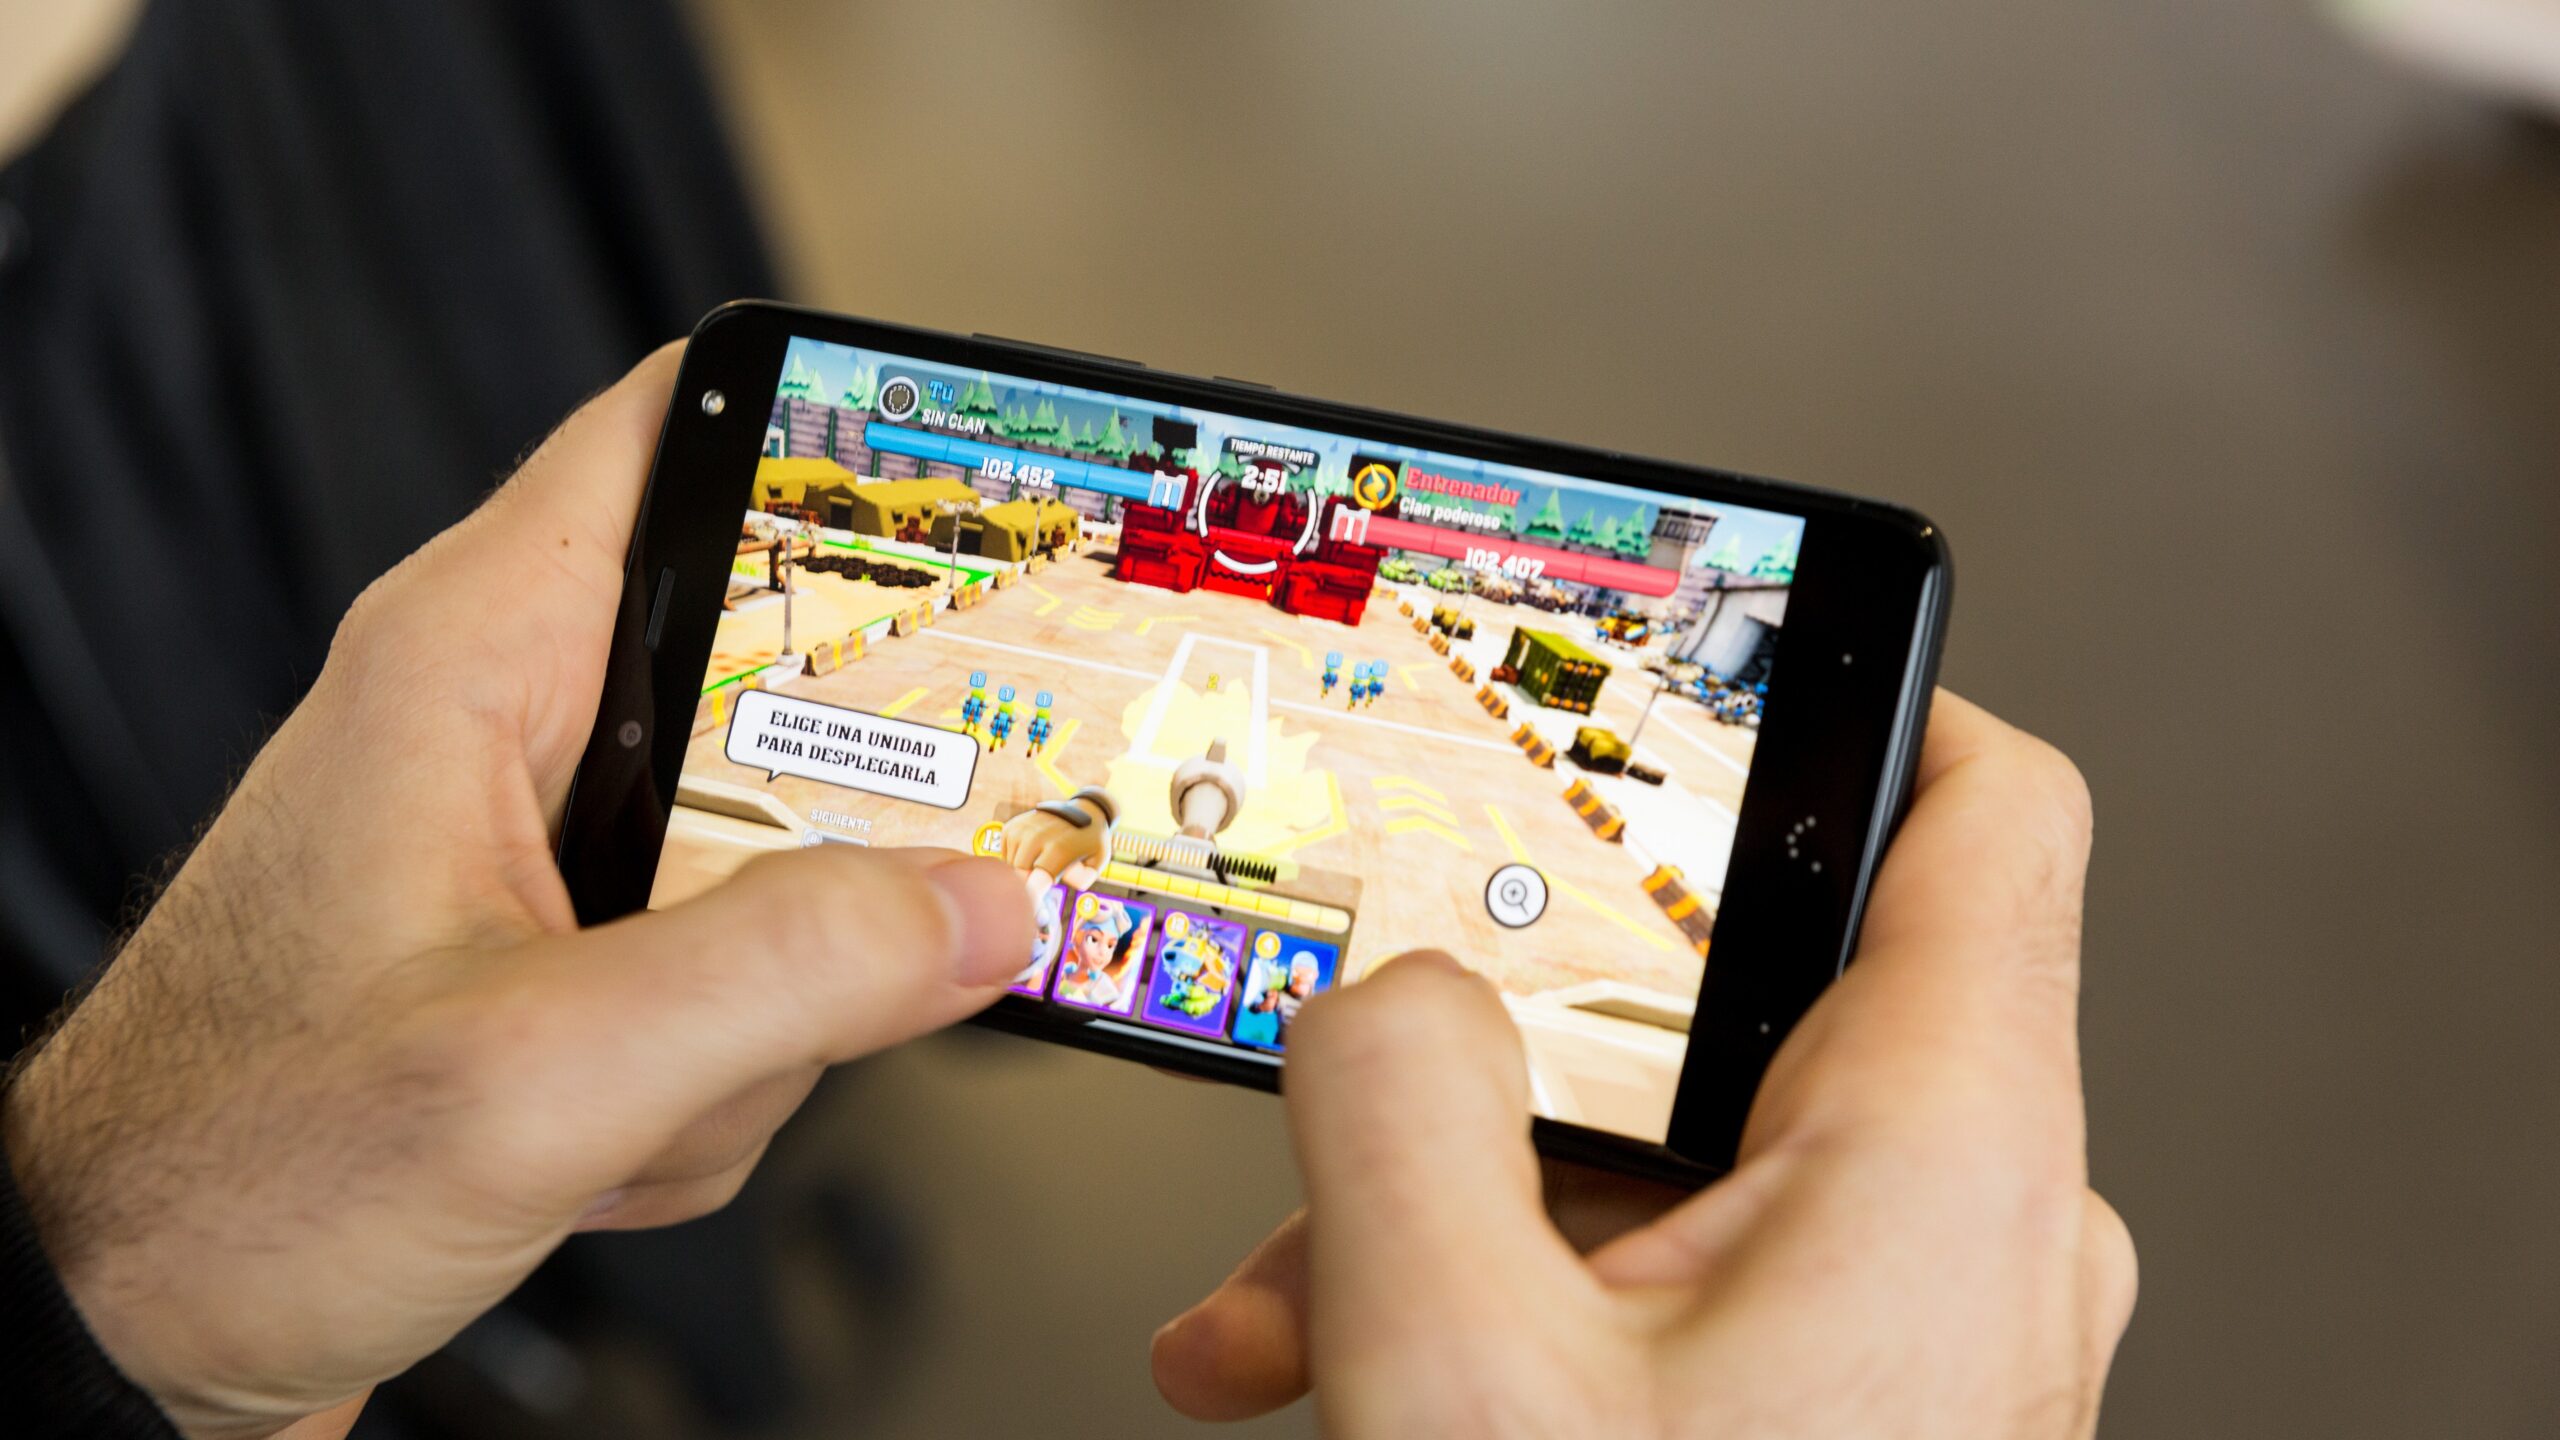 Findings of the week: 5 selected games and apps you need to know